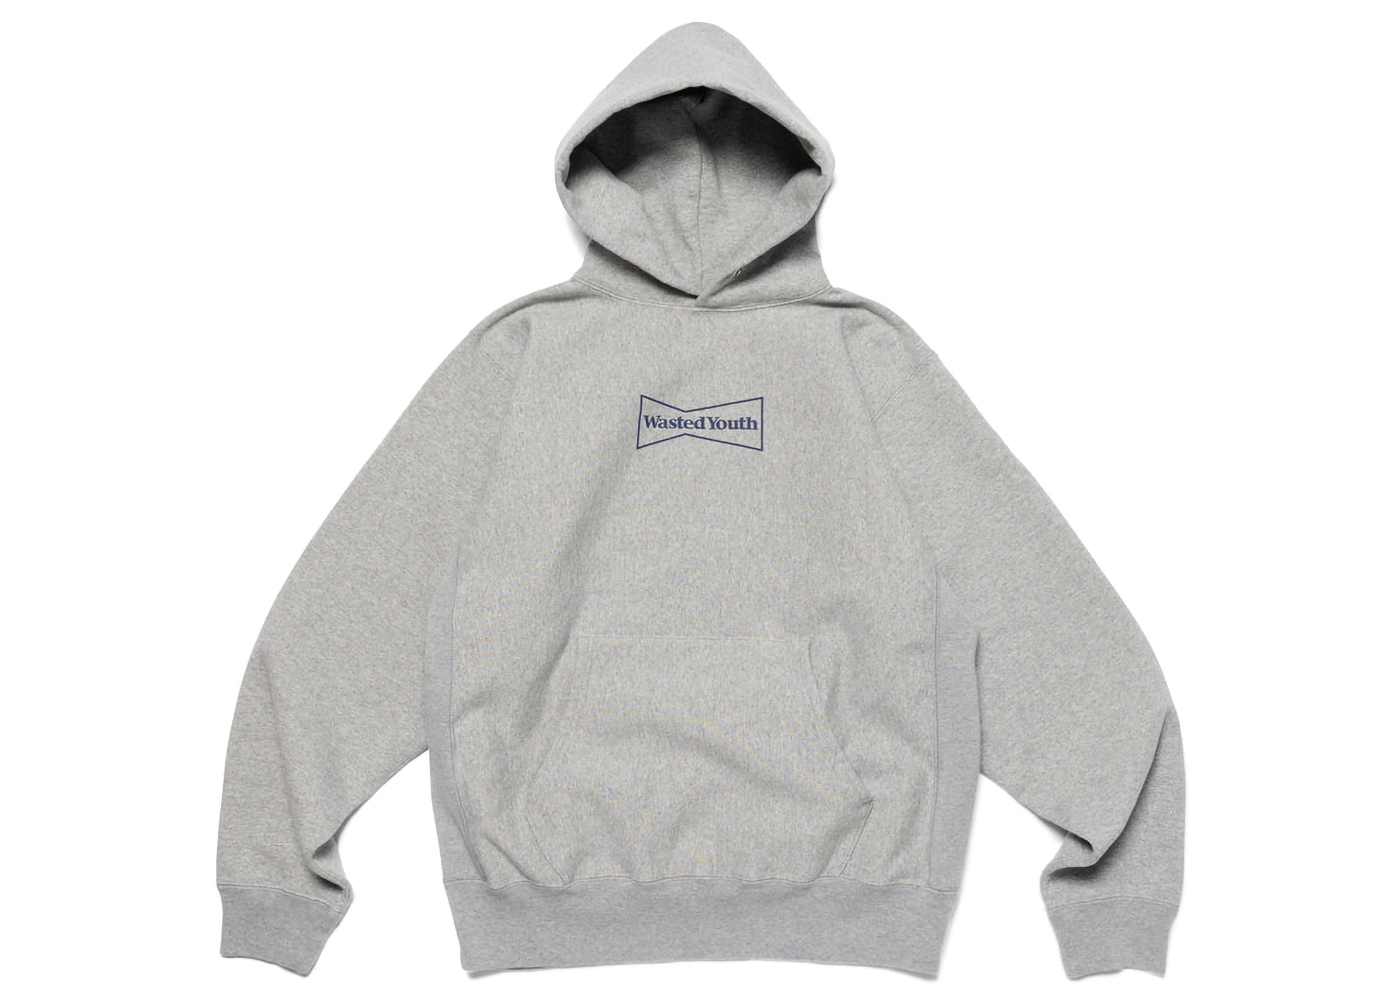 Wasted Youth Hoodie #2 Gray-